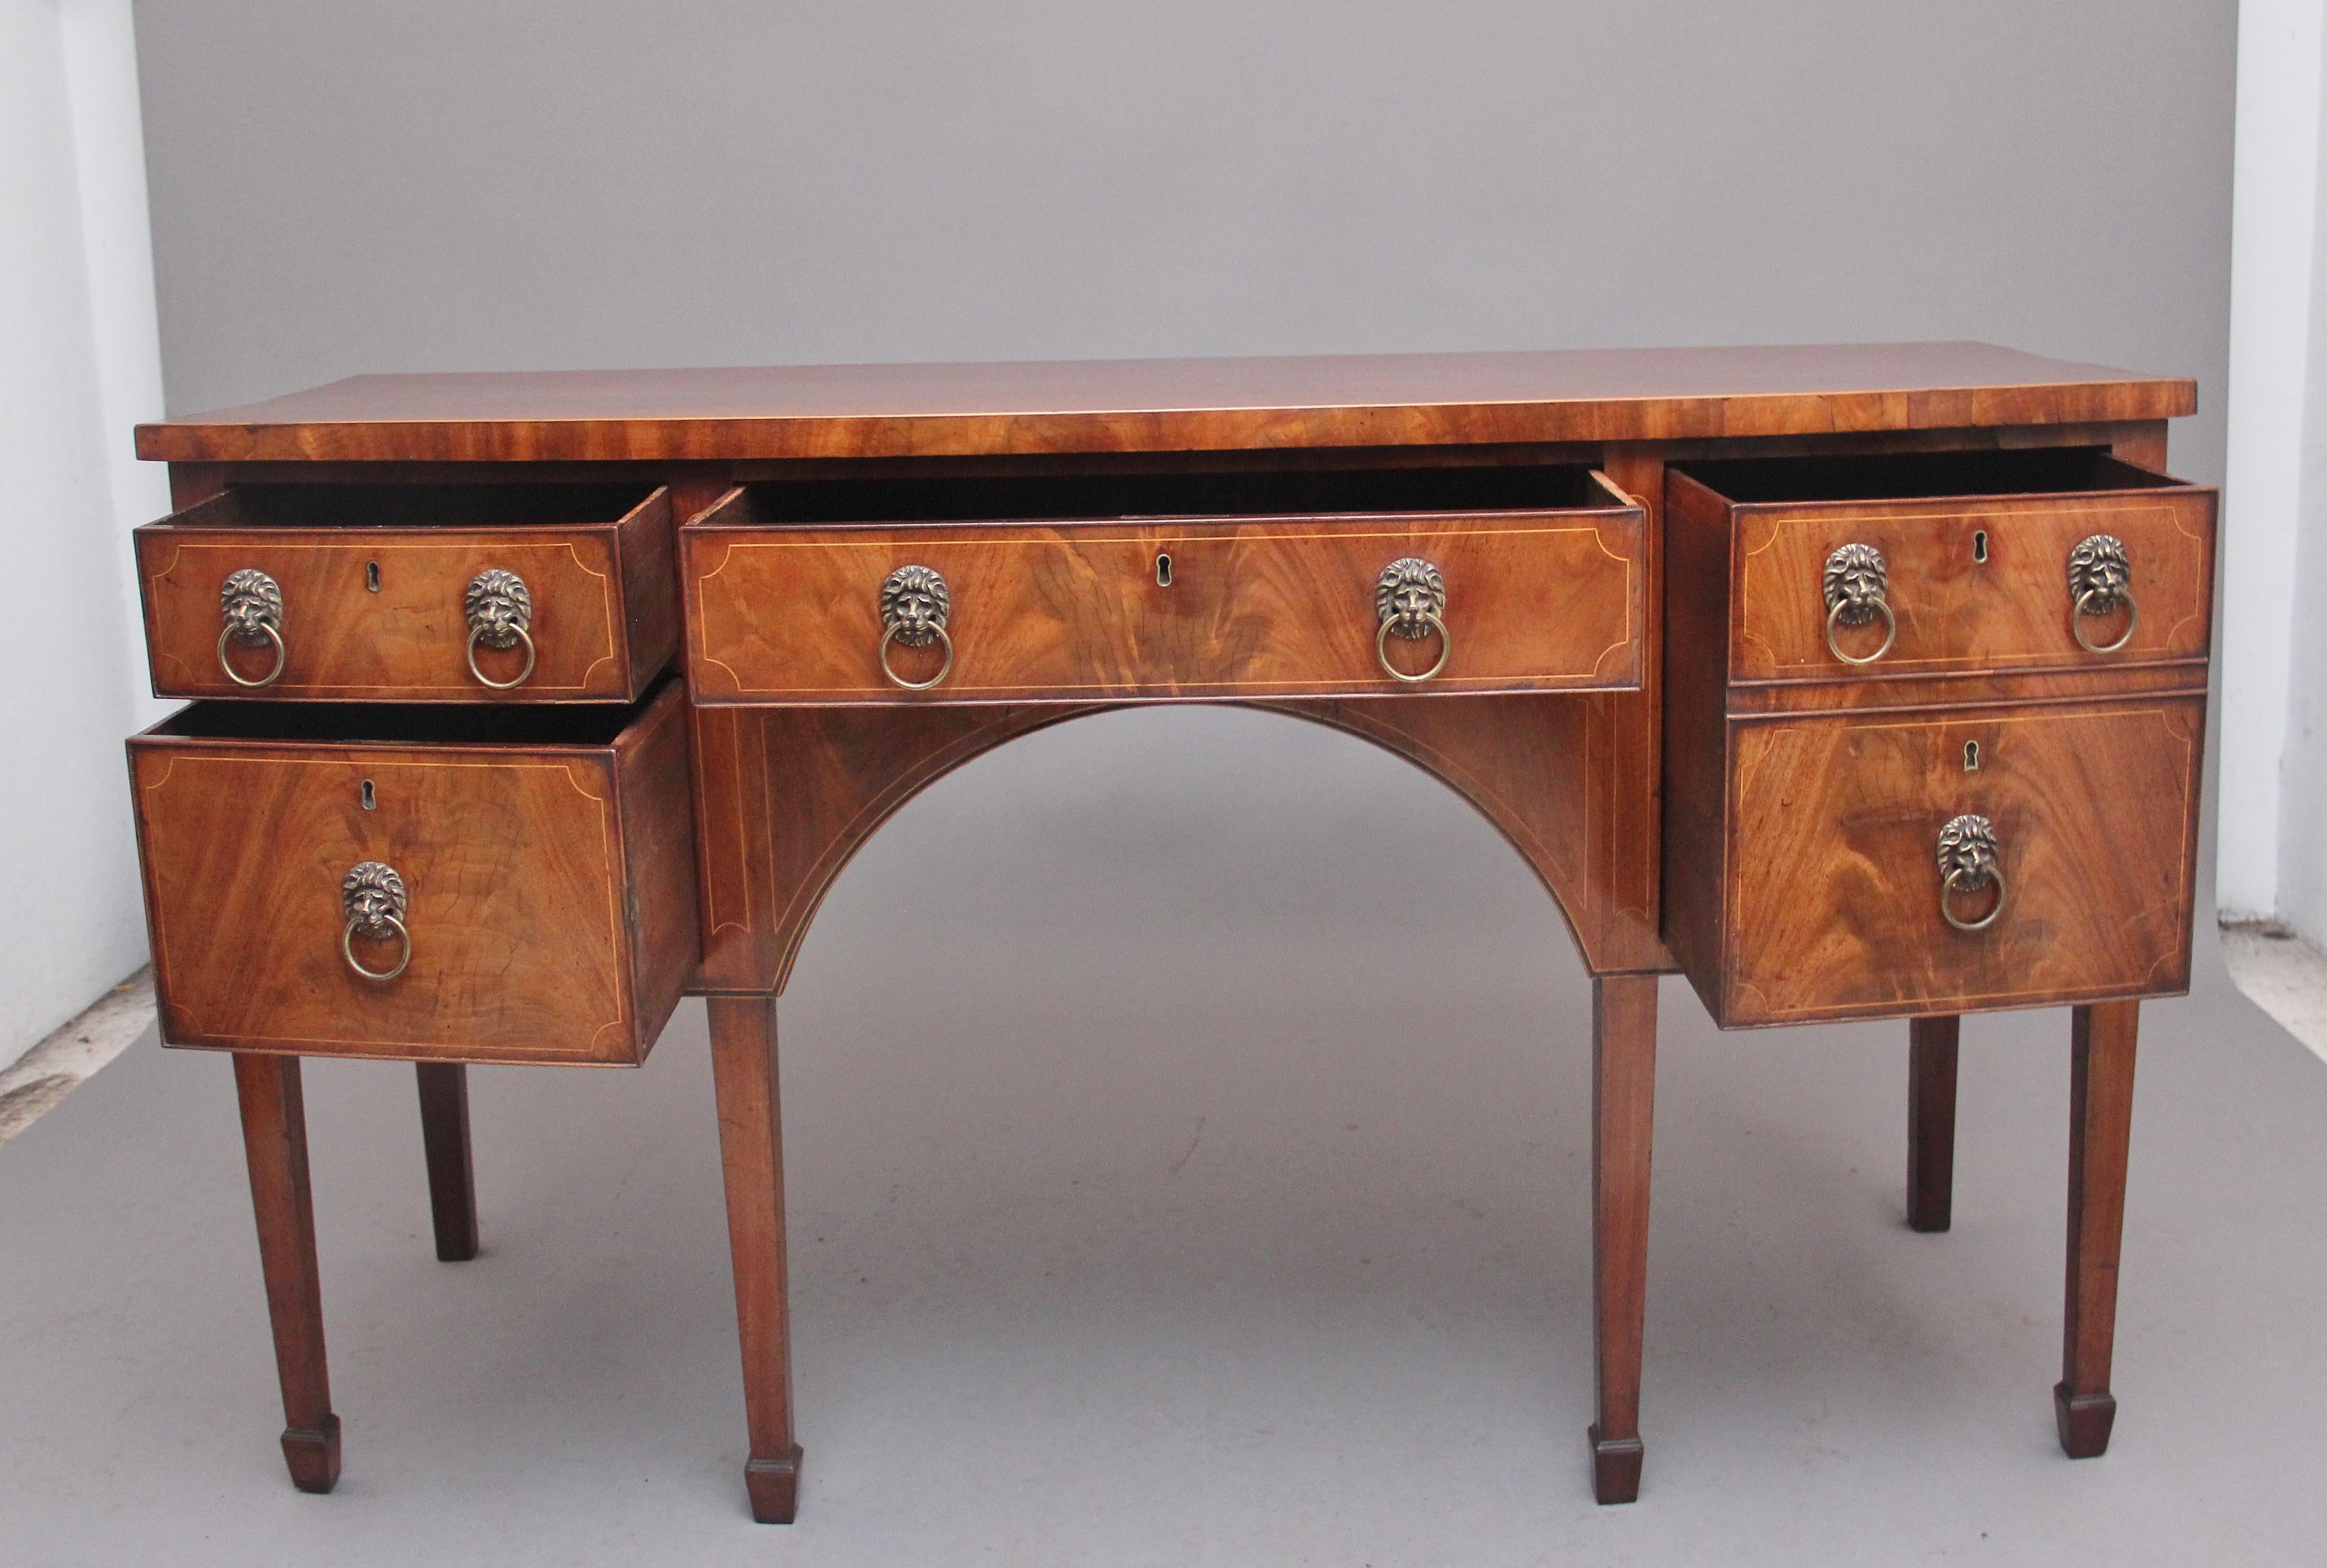 Early 19th Century inlaid mahogany sideboard, having a lovely figured shaped top, the front of the sideboard looking like it has a combination of five drawers but in fact it has a large deep drawer to the right, the drawer fronts have decorative